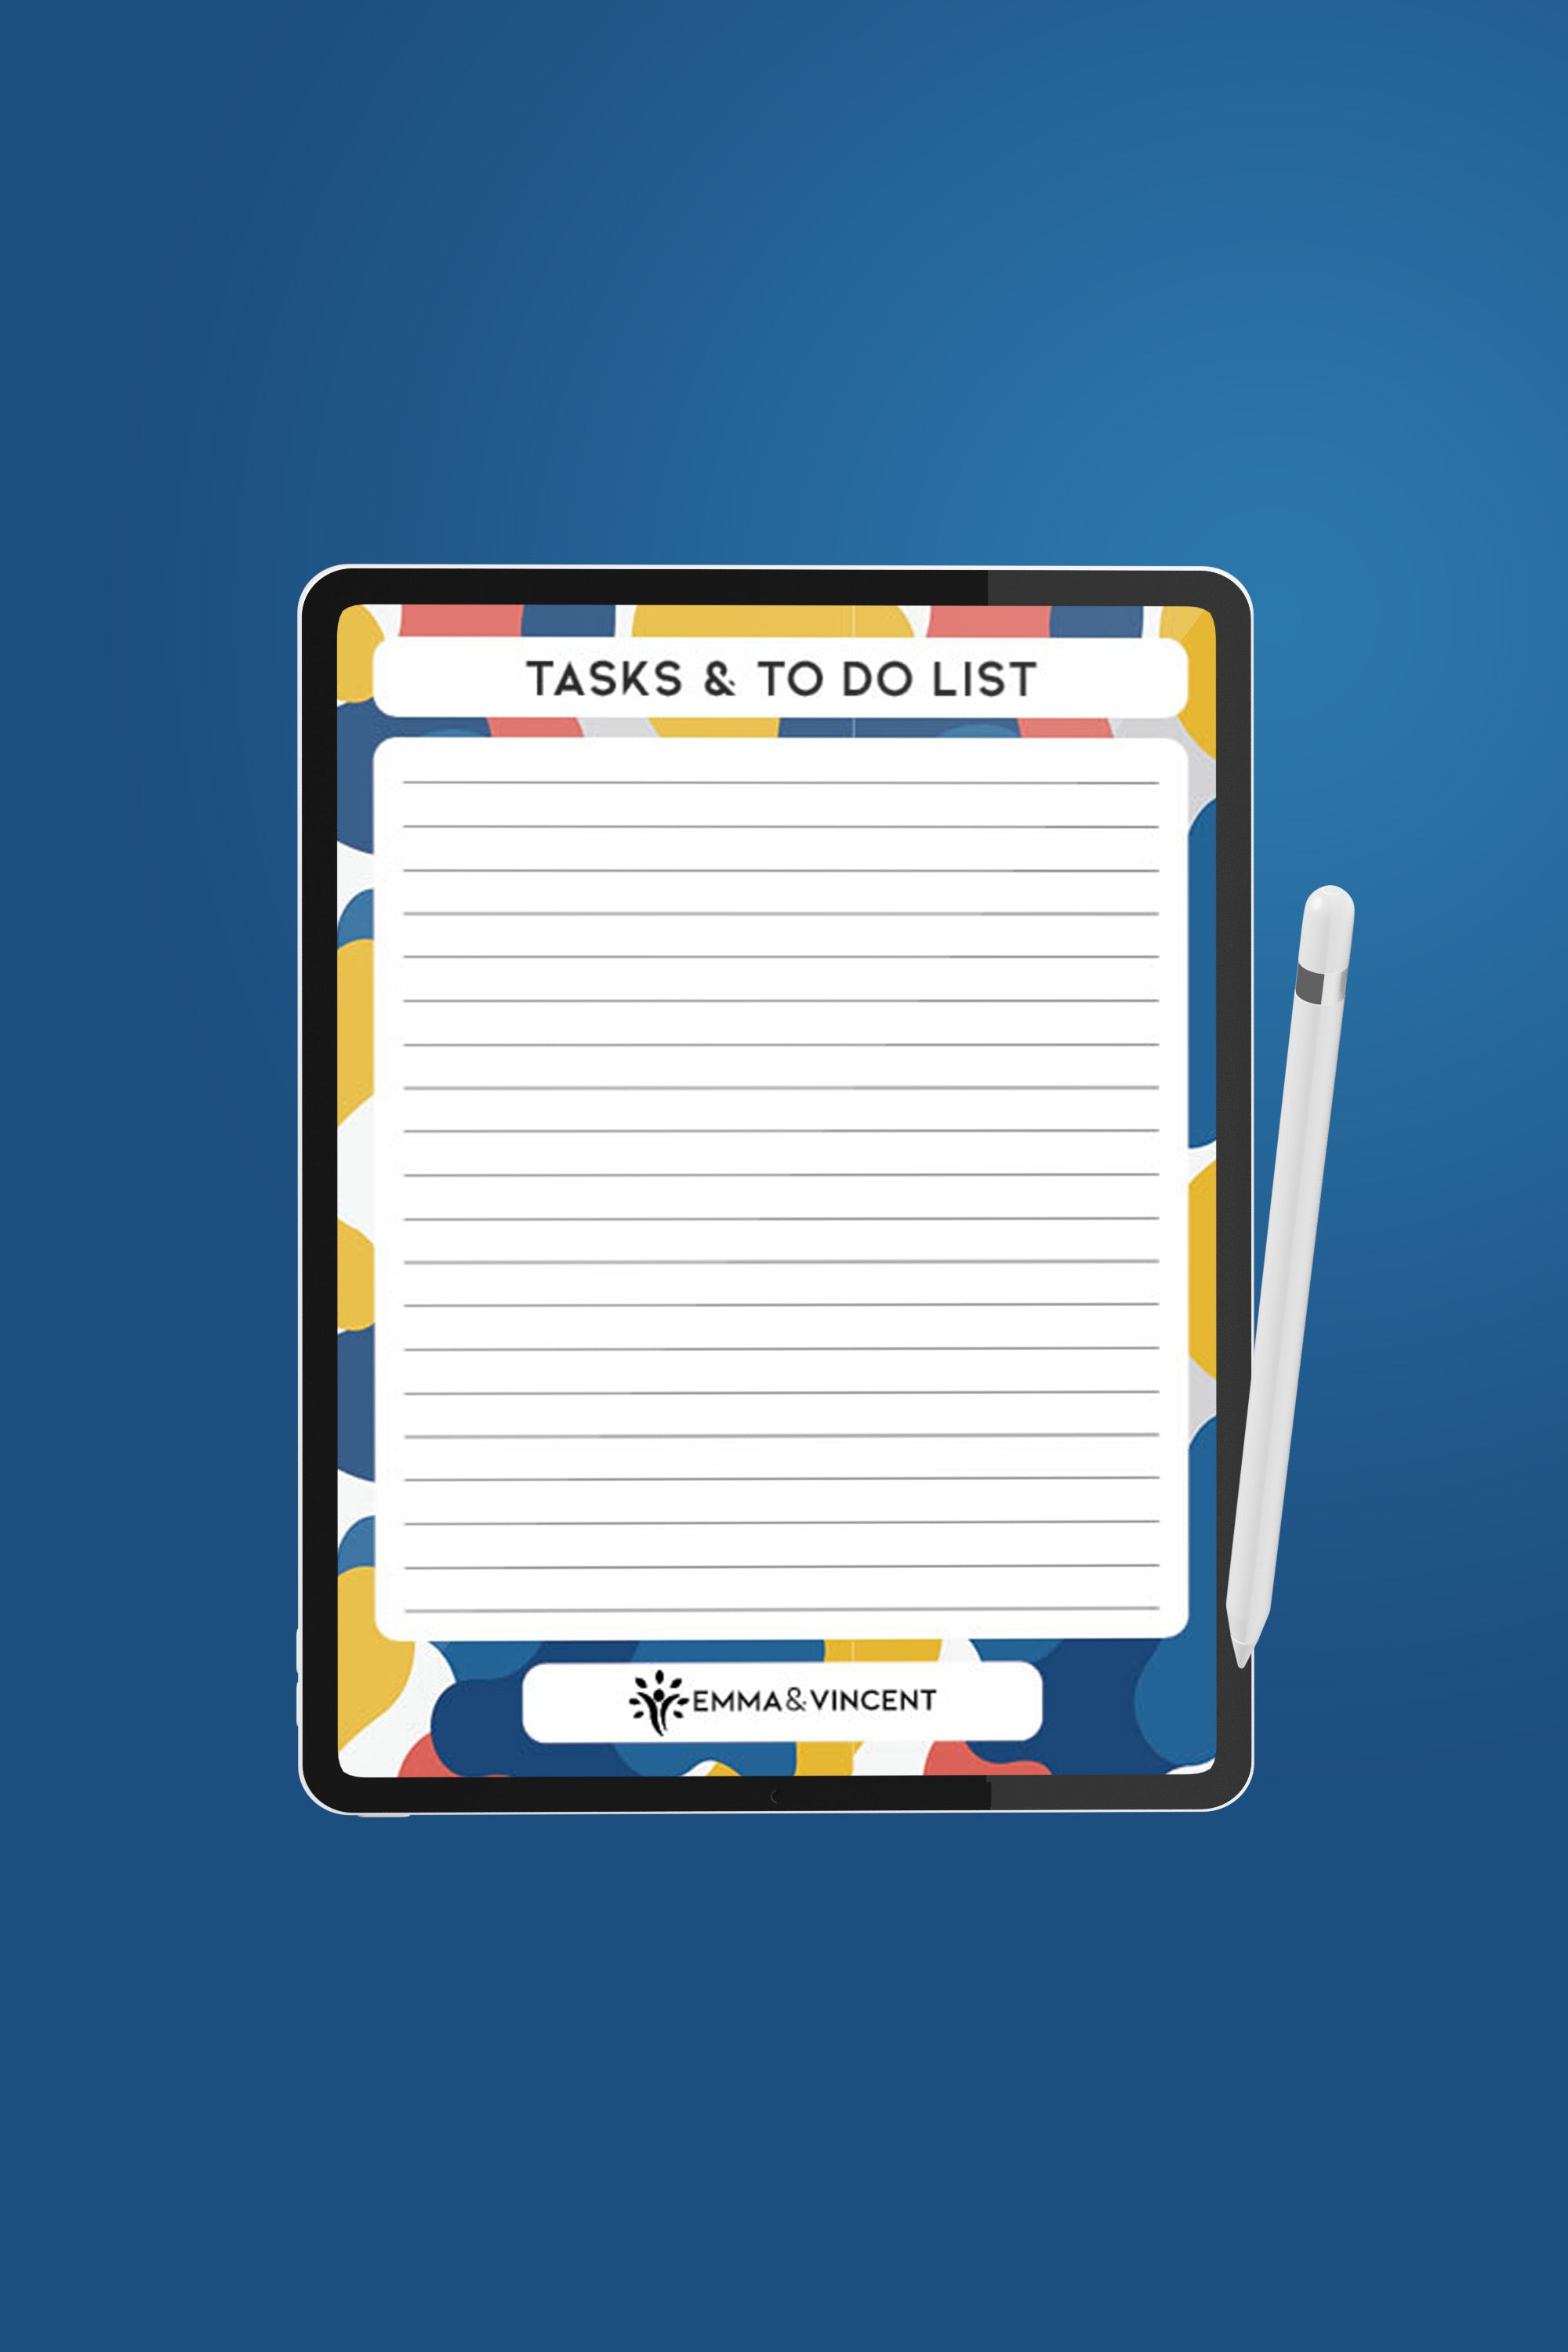 Digital Tasks & To Do List Planner - Flying Colours Pack A - 4 Designs Included!